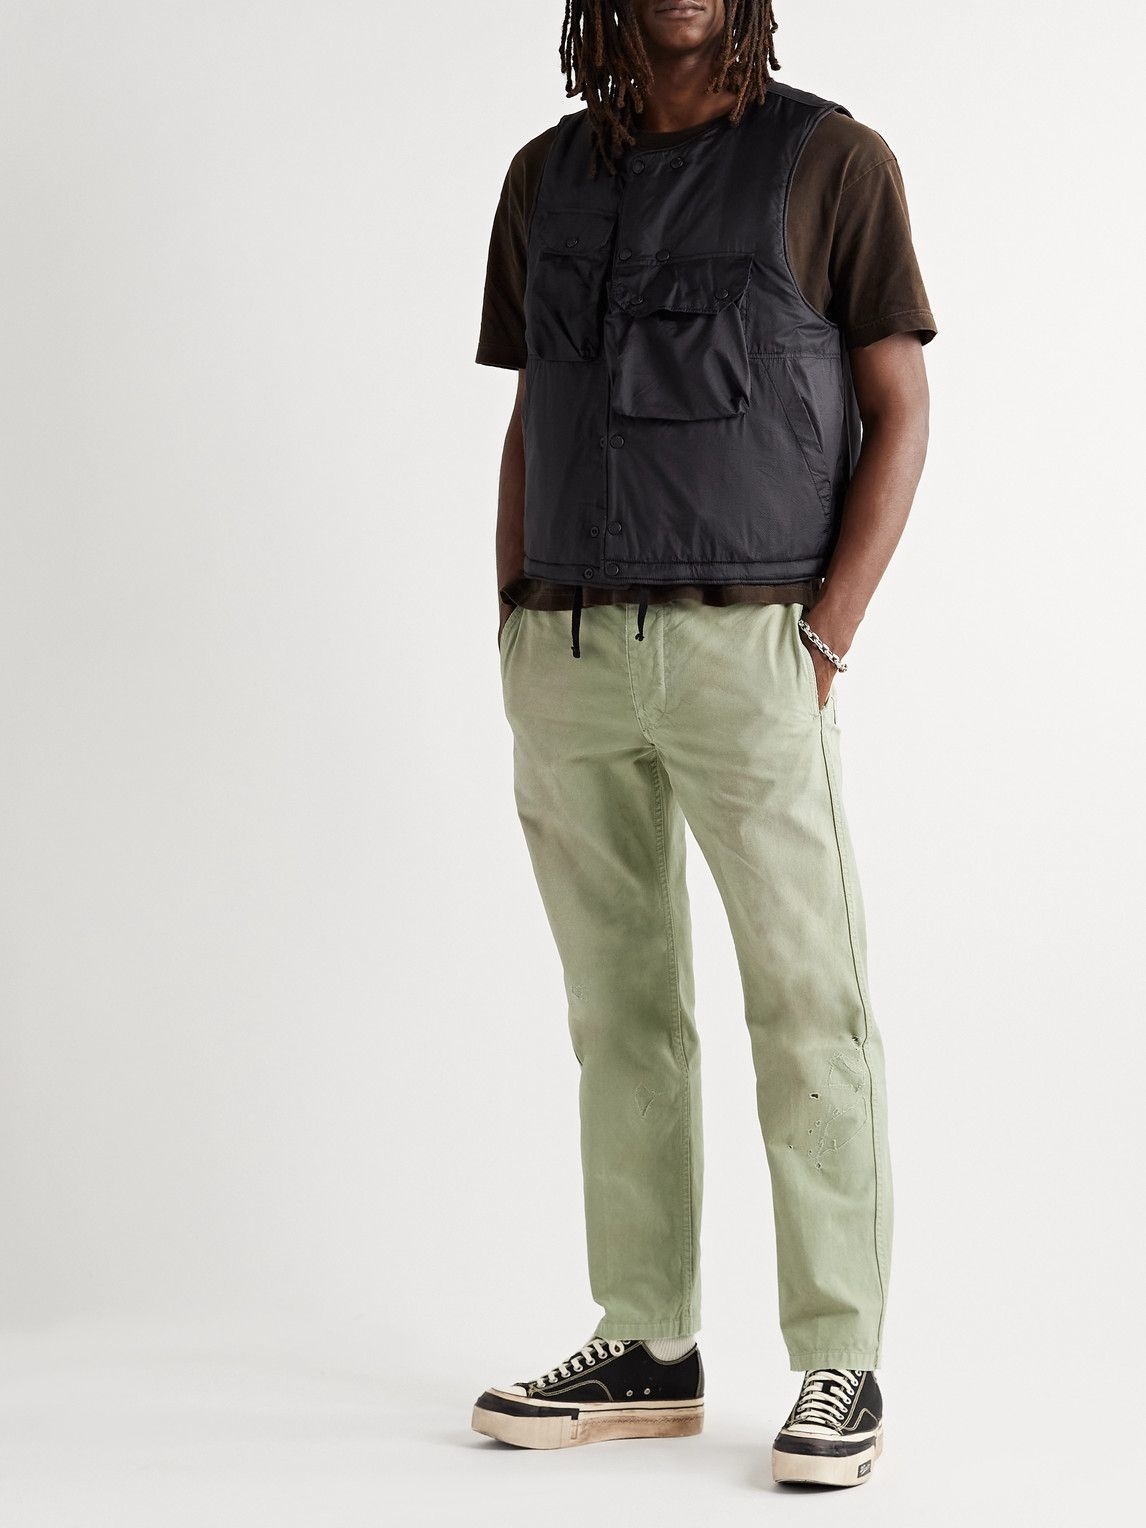 Visvim - Gifford Garment-Dyed Distressed Cotton-Canvas Trousers 